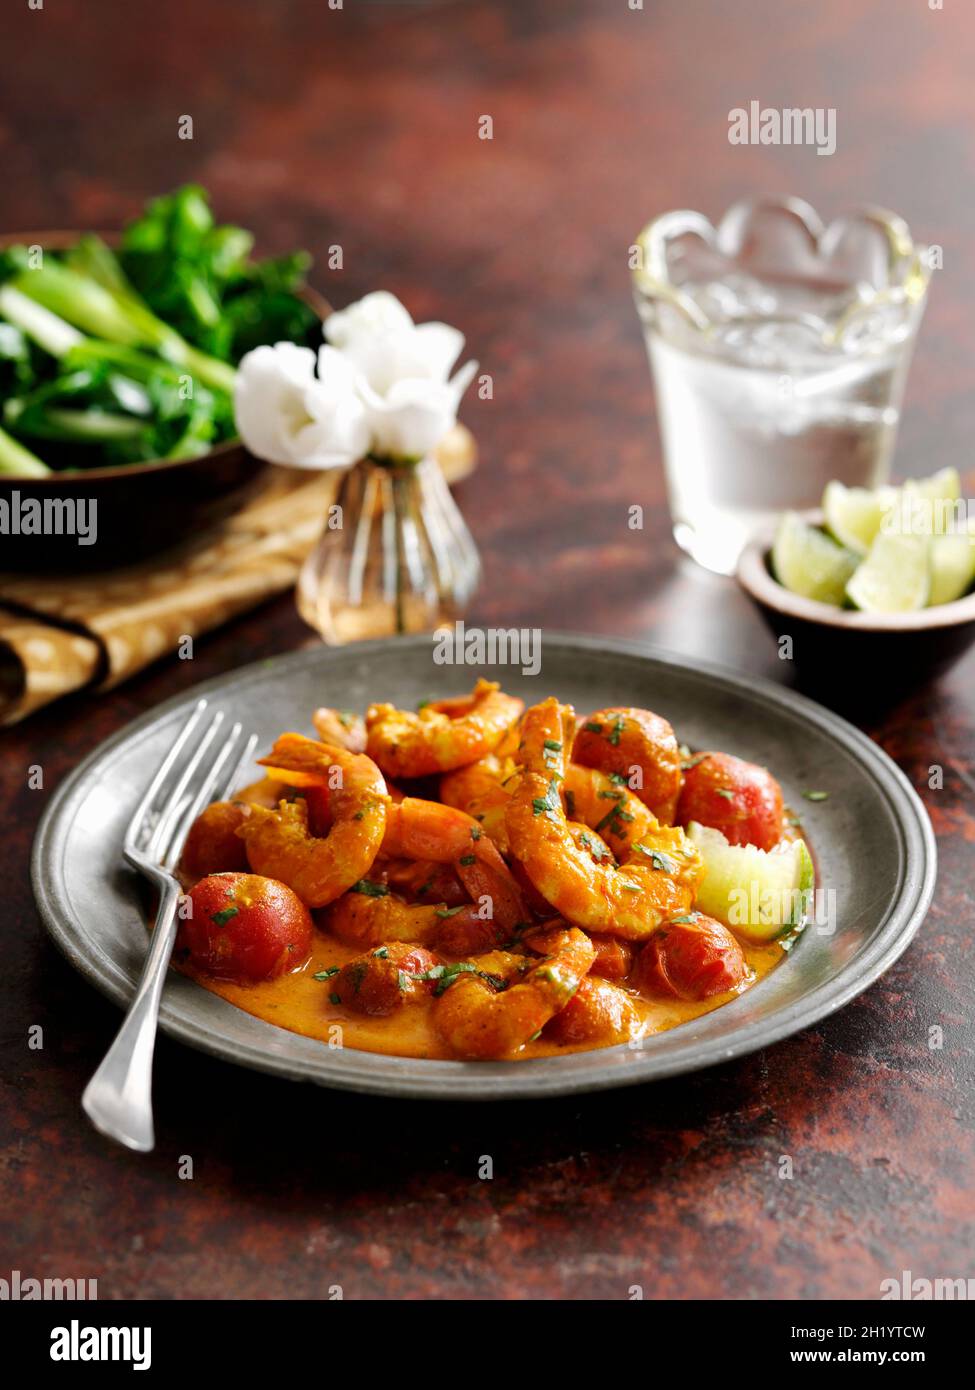 Southern Indian prawn curry Stock Photo